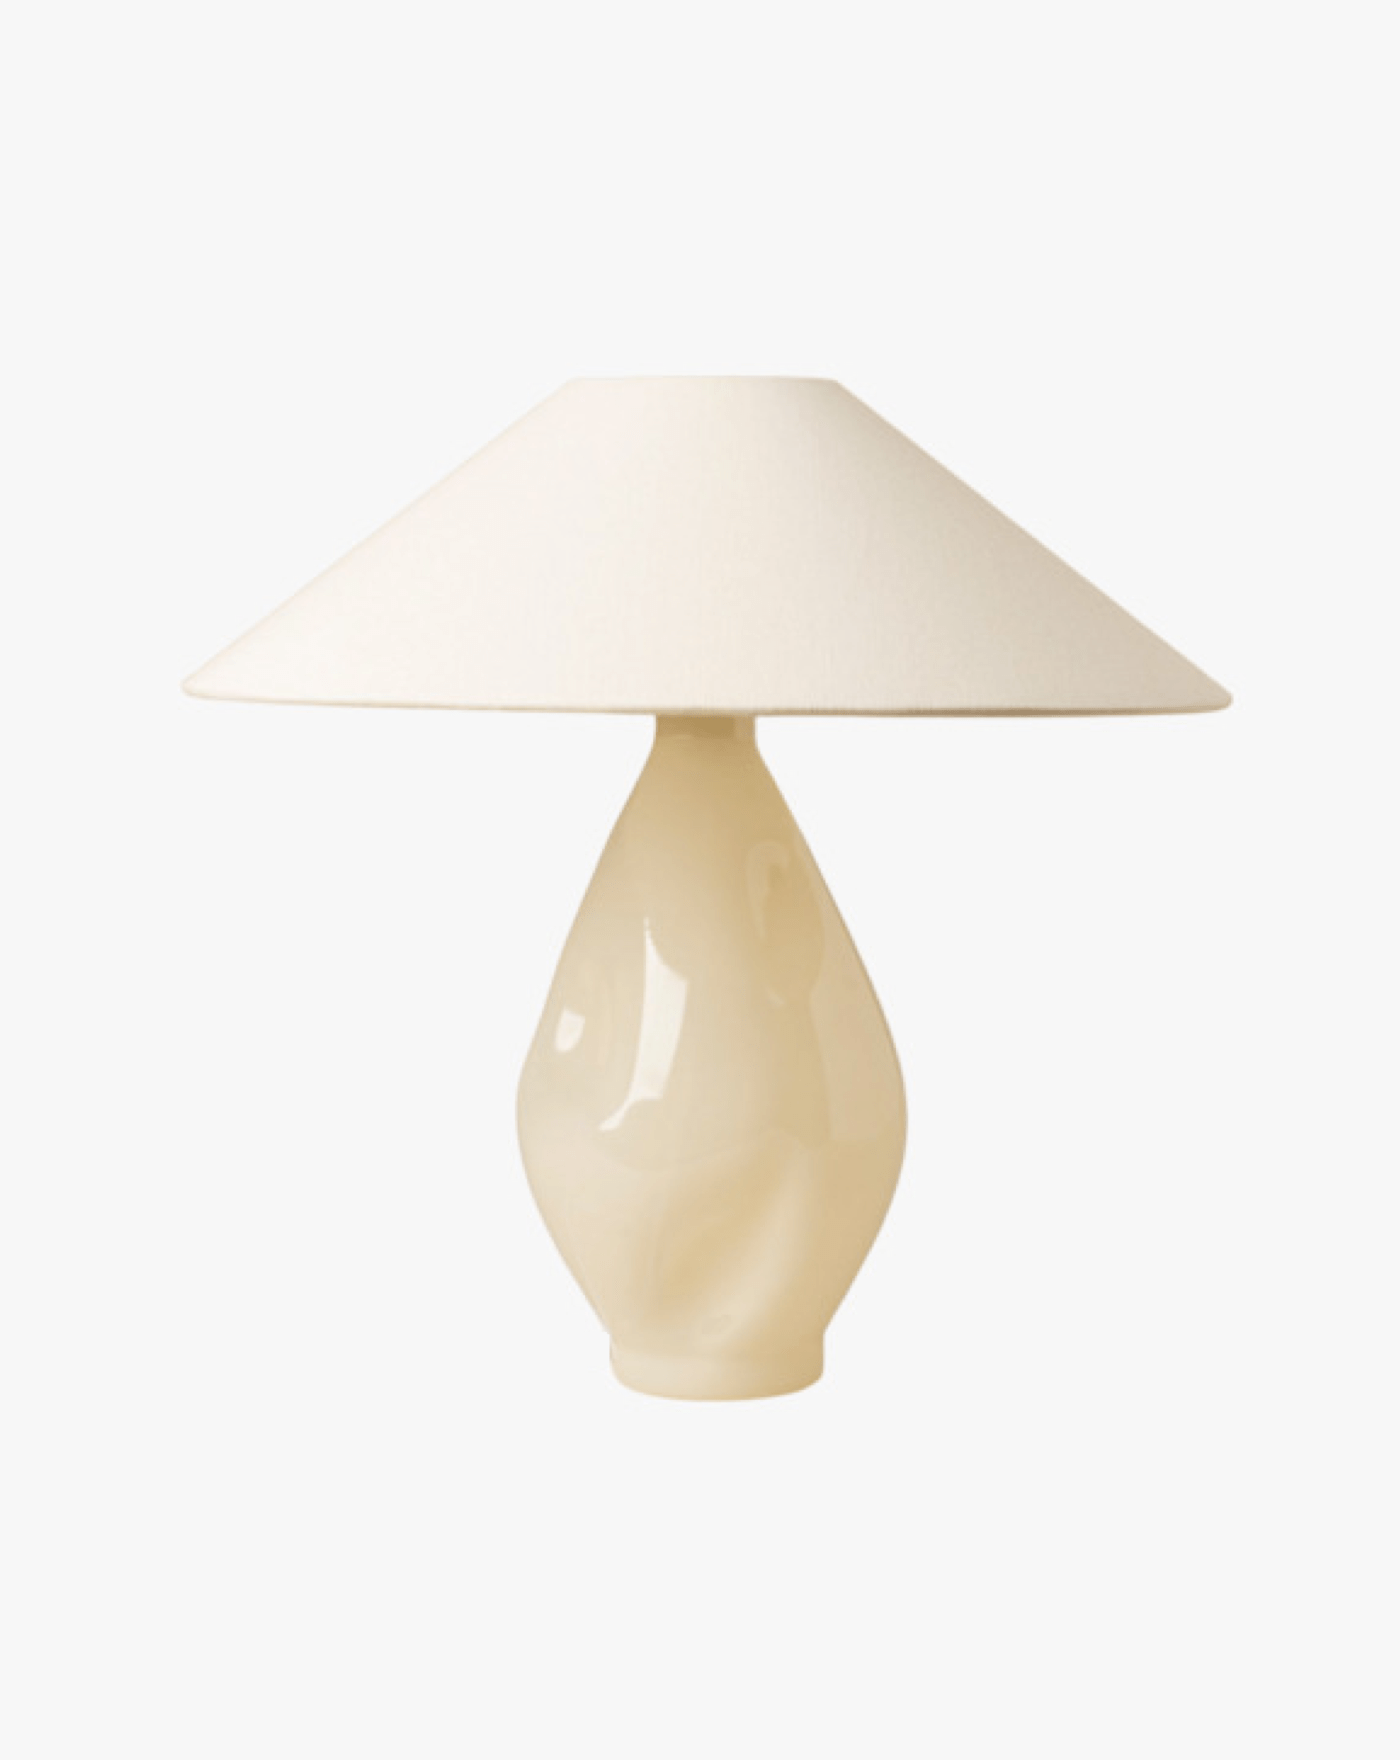 Sentence with product name and brand name:
"Elegant Beige Conical Glass Lamp by Los Objetos Decorativos with a creamy beige, glossy base and a wide, flat-topped white lampshade, isolated on a white background. This piece embodies interior elegance through its sophisticated design.